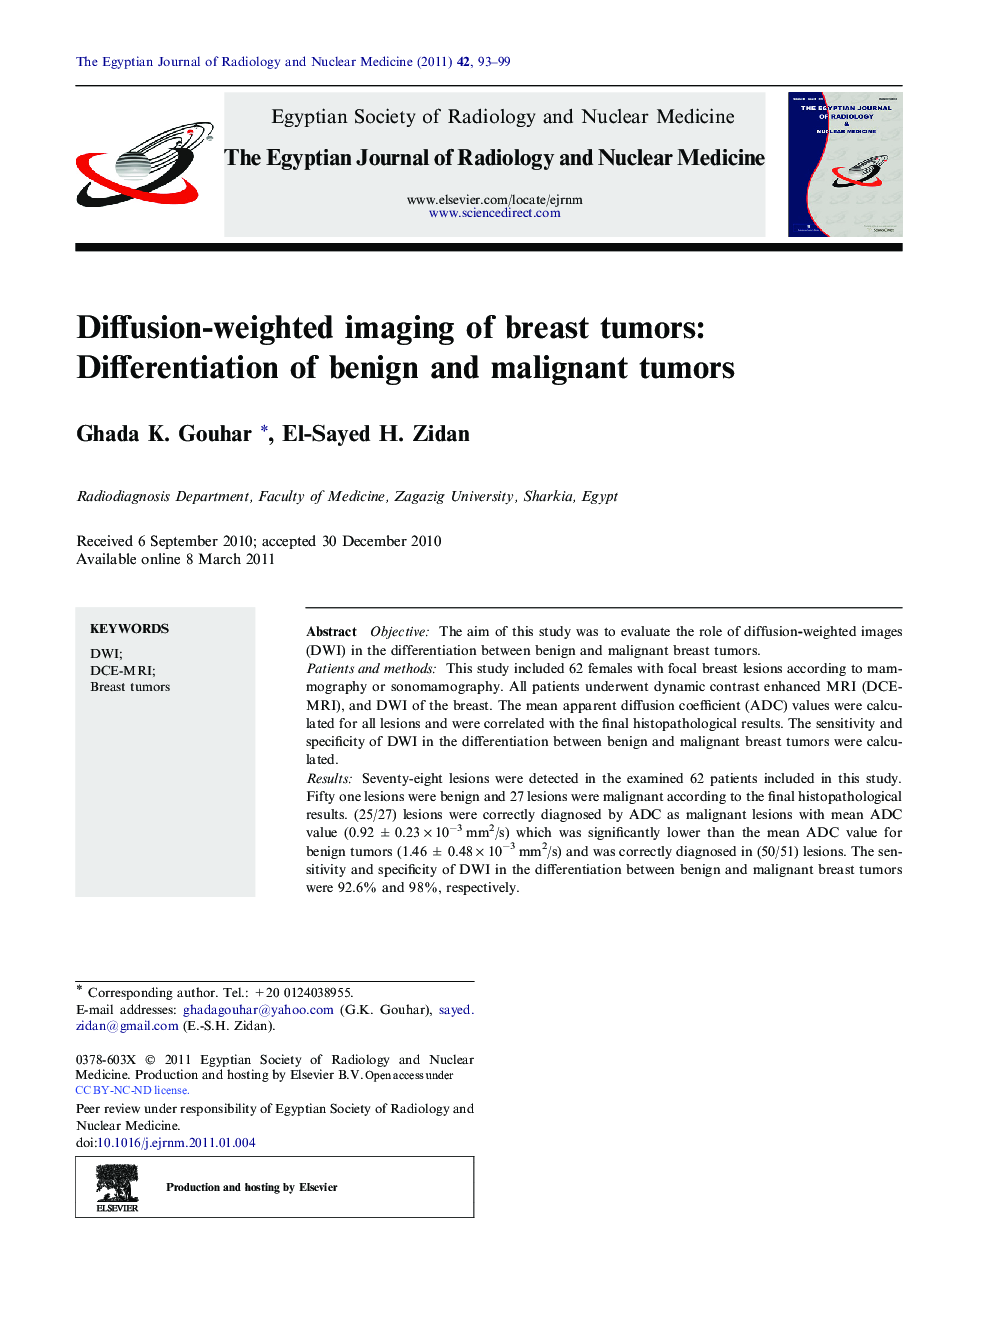 Diffusion-weighted imaging of breast tumors: Differentiation of benign and malignant tumors 